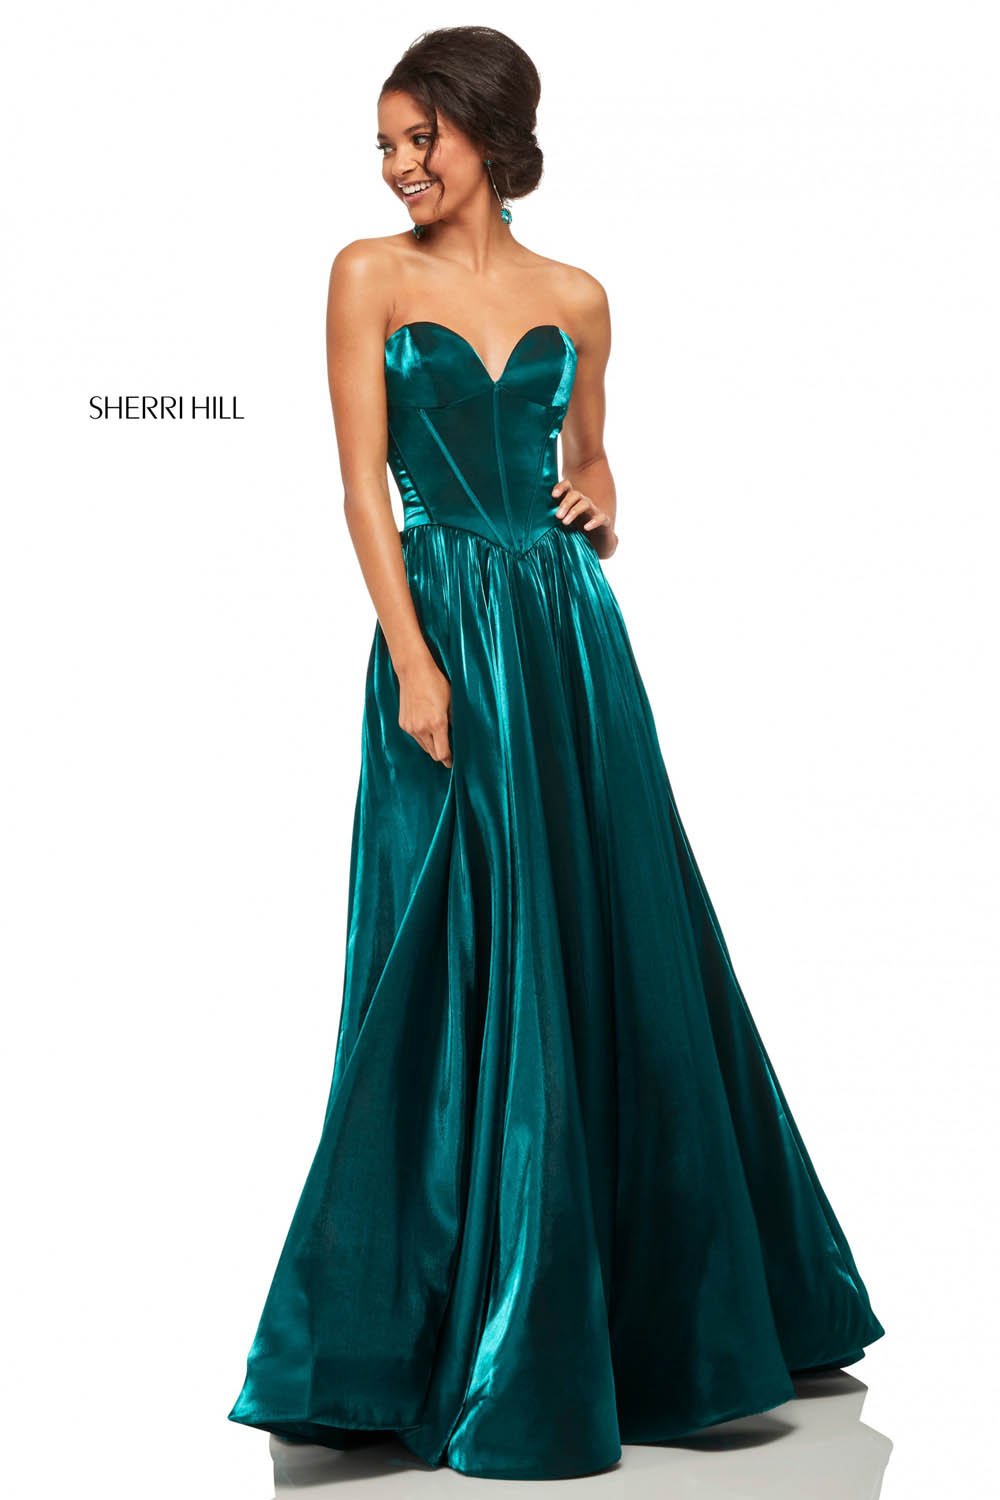 Sherri Hill 52760 dress images in these colors: Navy, Wine, Emerald, Gunmetal, Purple.